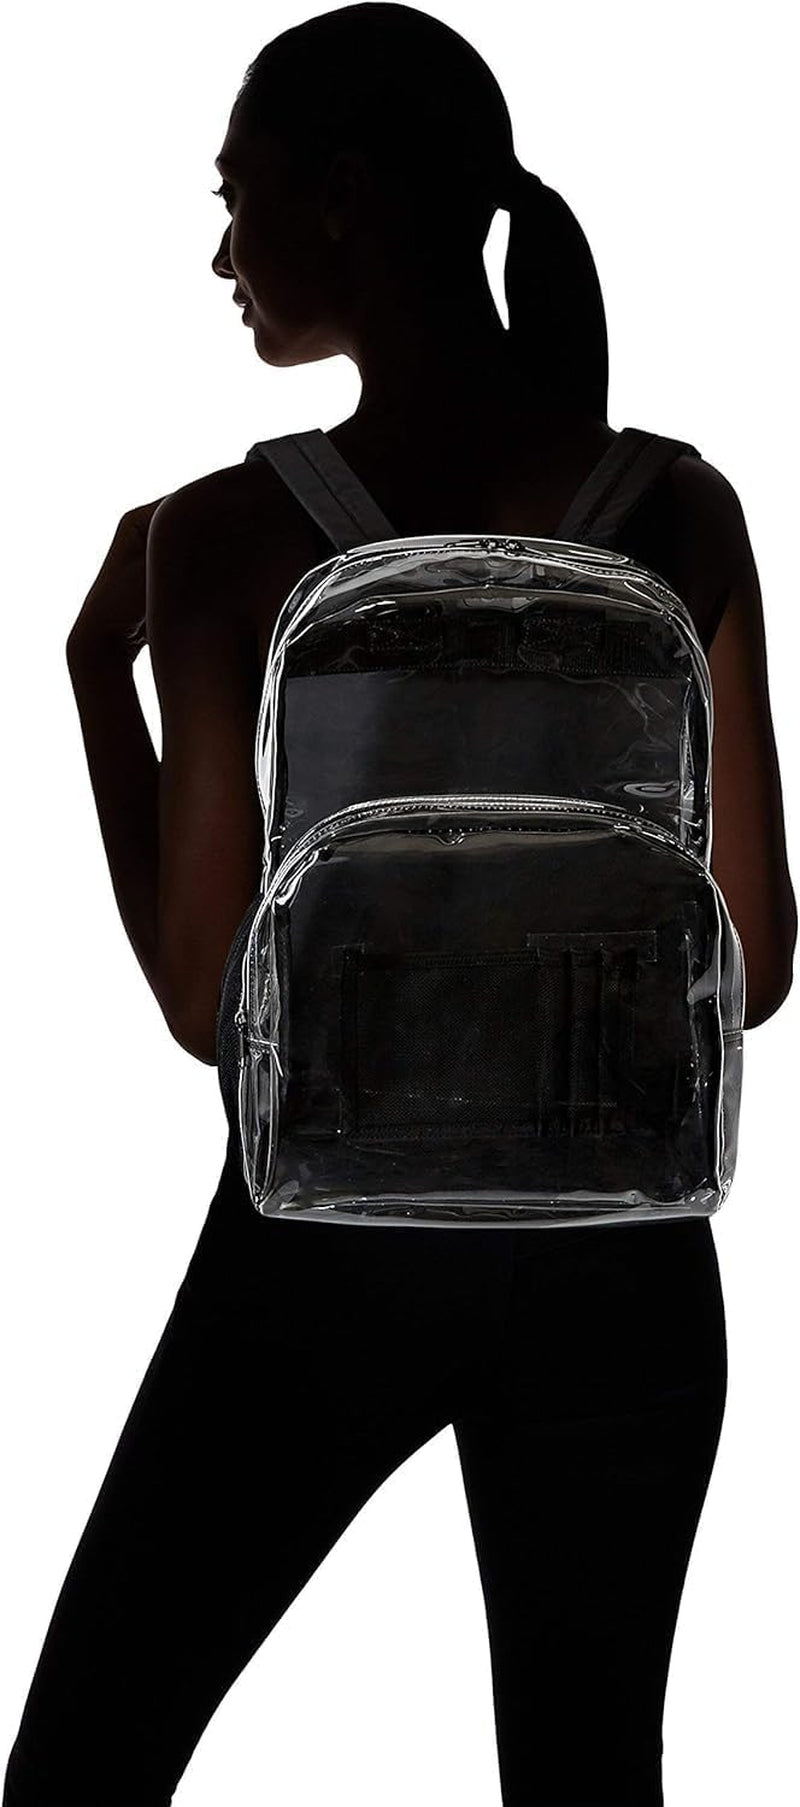 Transparent School Backpack, with Water-Resistant PVC Plastic Material and Ruggedly Ruinforced Shoulder Straps, Clear